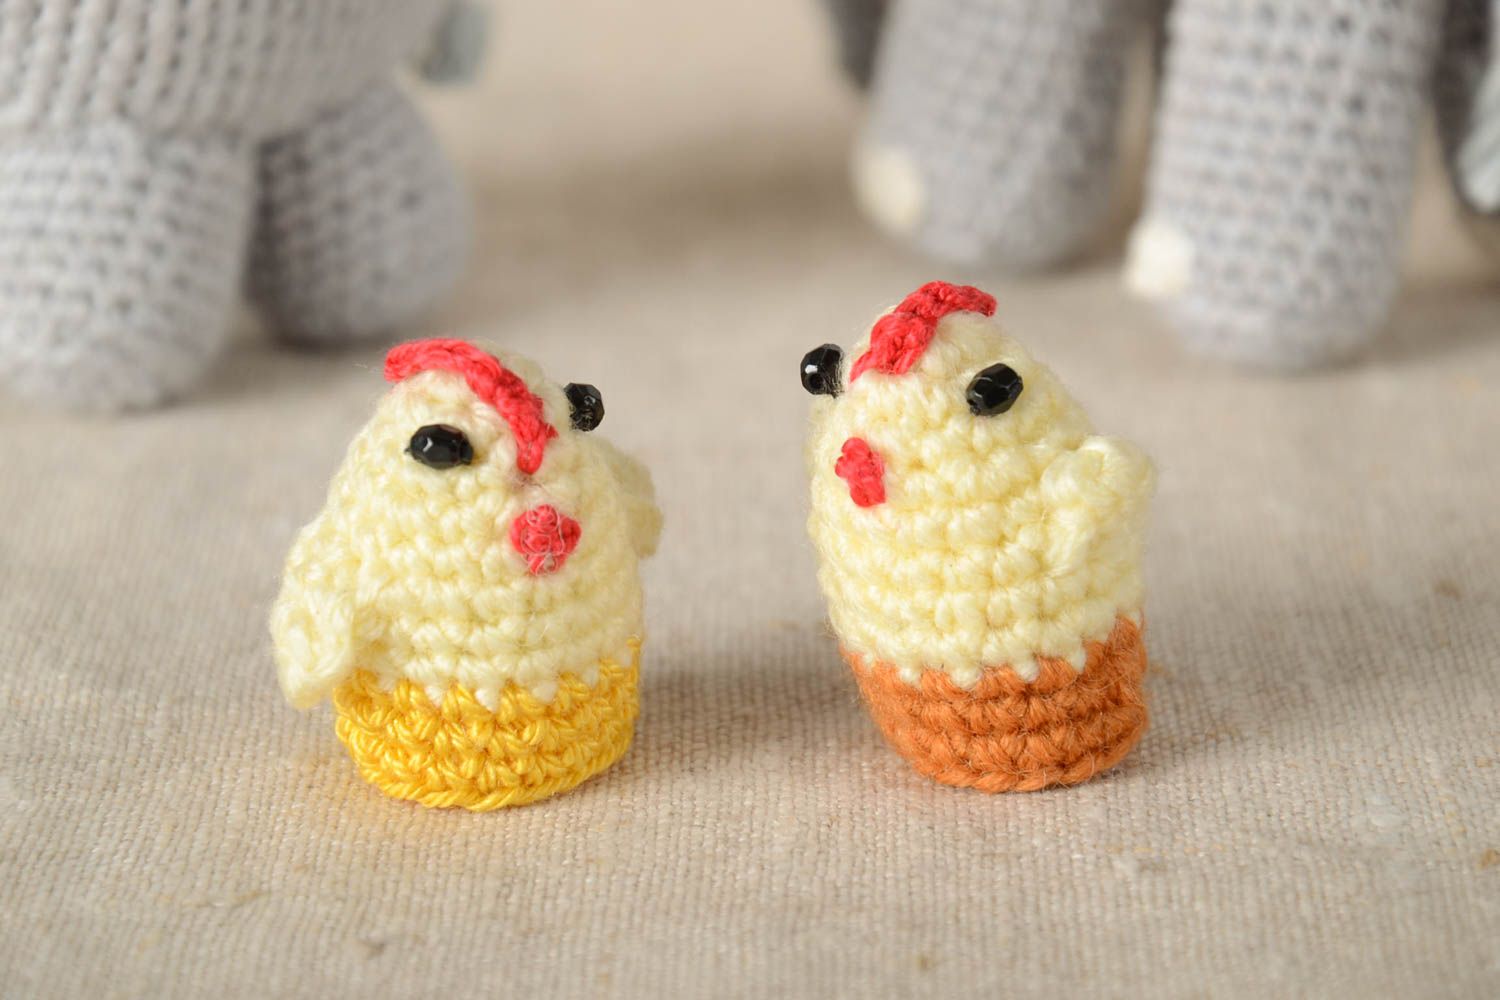 Tiny handmade toys crocheted beautiful toys chickens toys for kids 2 pieces photo 1